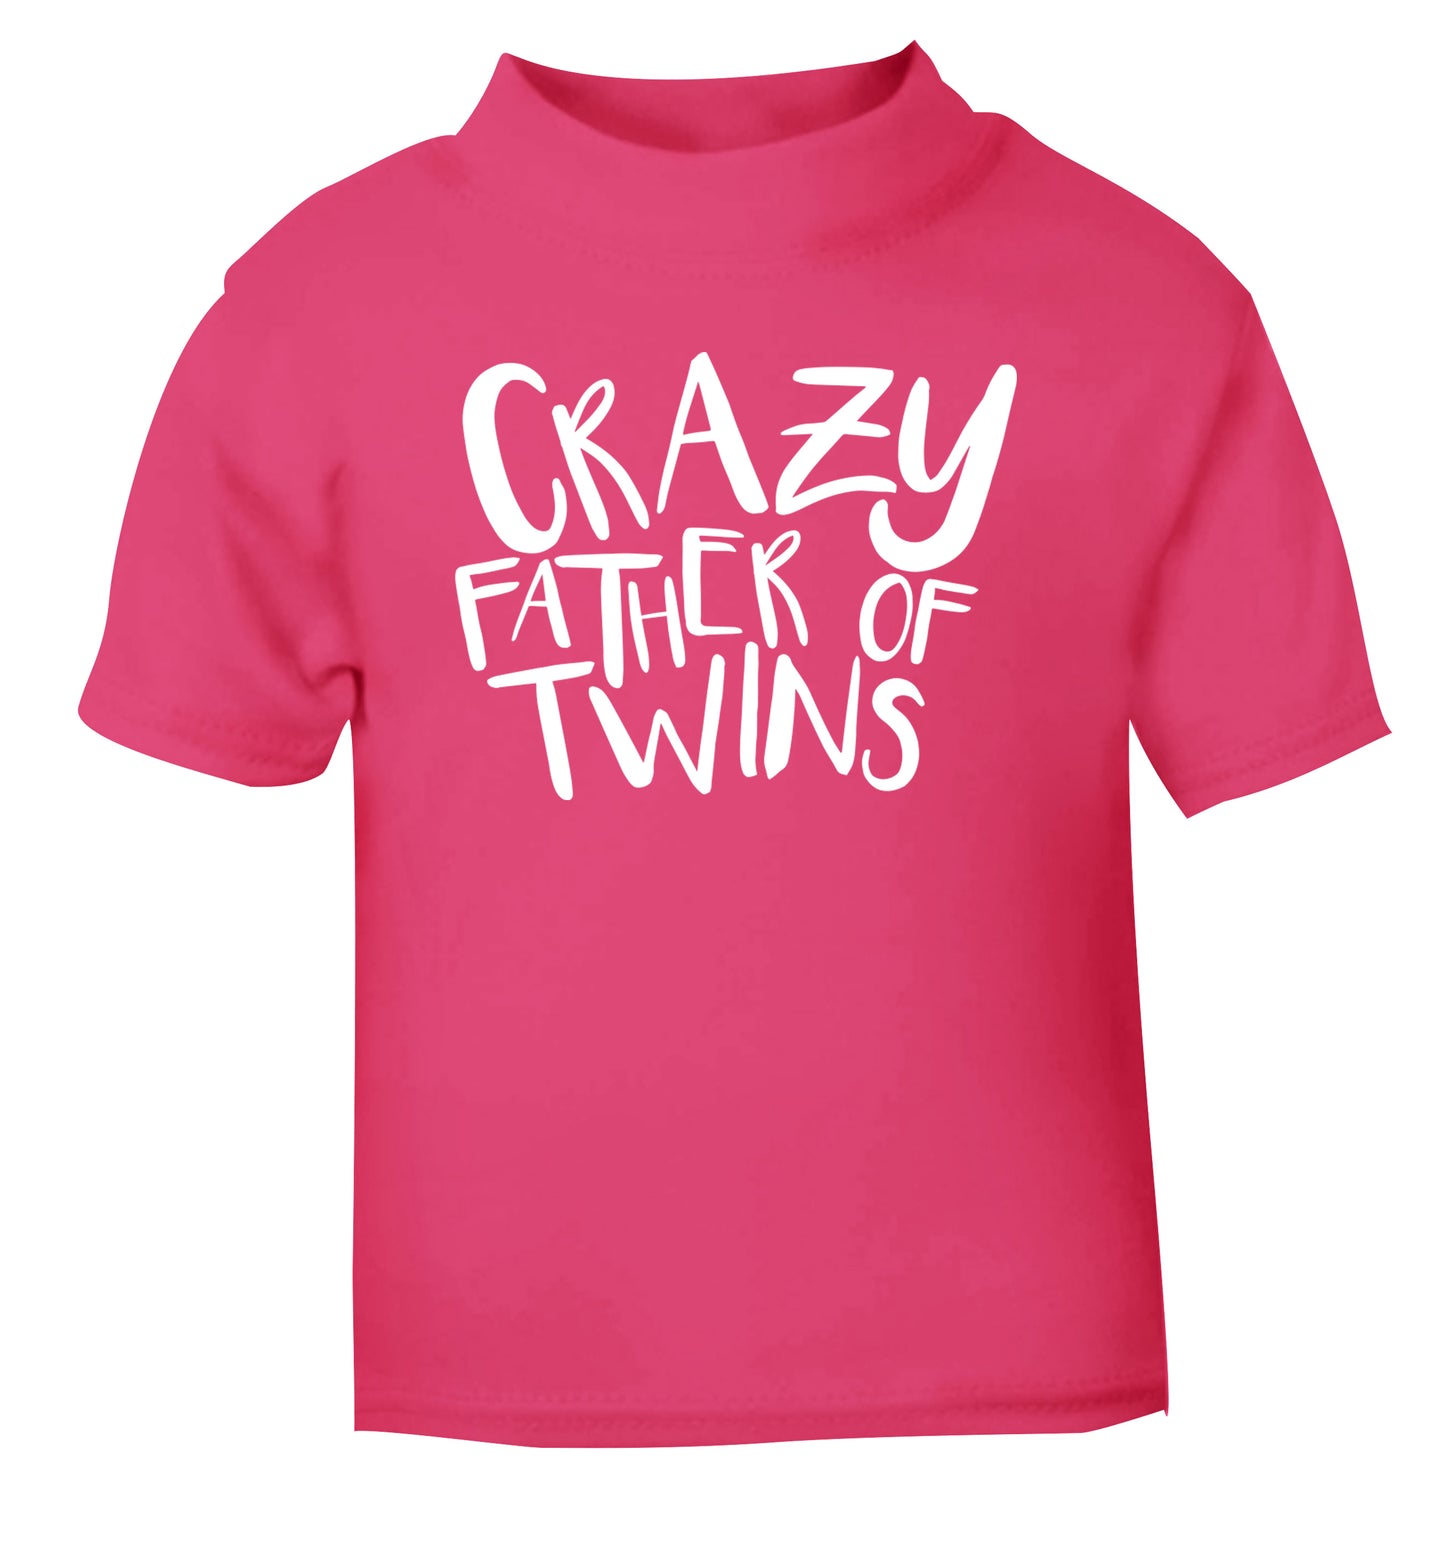 Crazy father of twins pink Baby Toddler Tshirt 2 Years